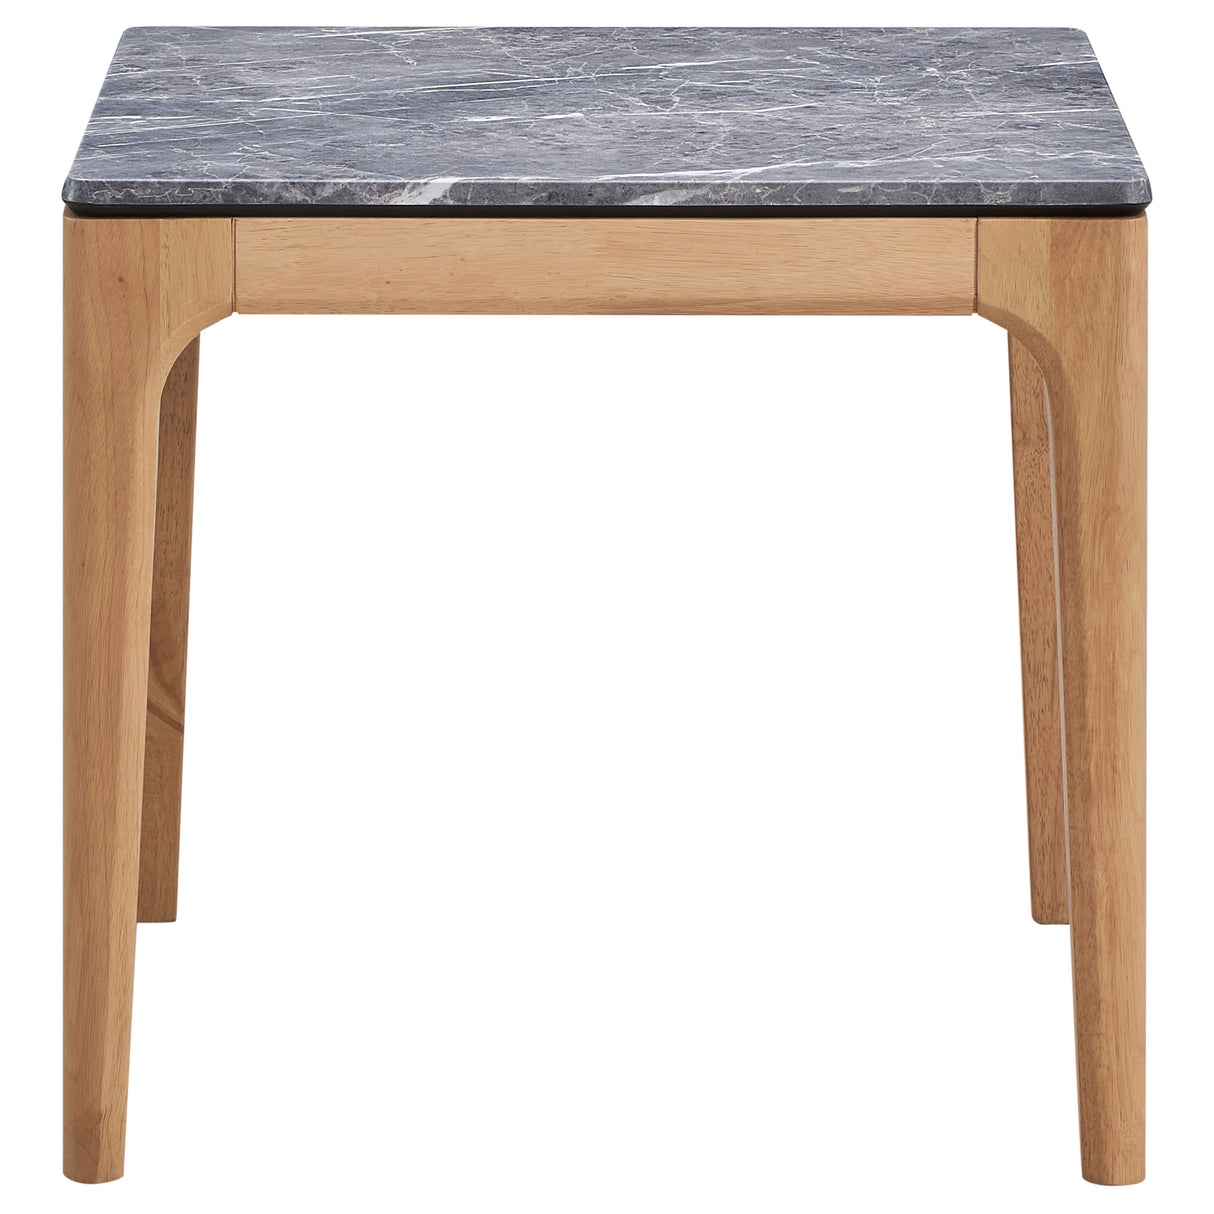 End Table - Polaris Rectangular End Table with Marble-like Top Teramo and Light Oak